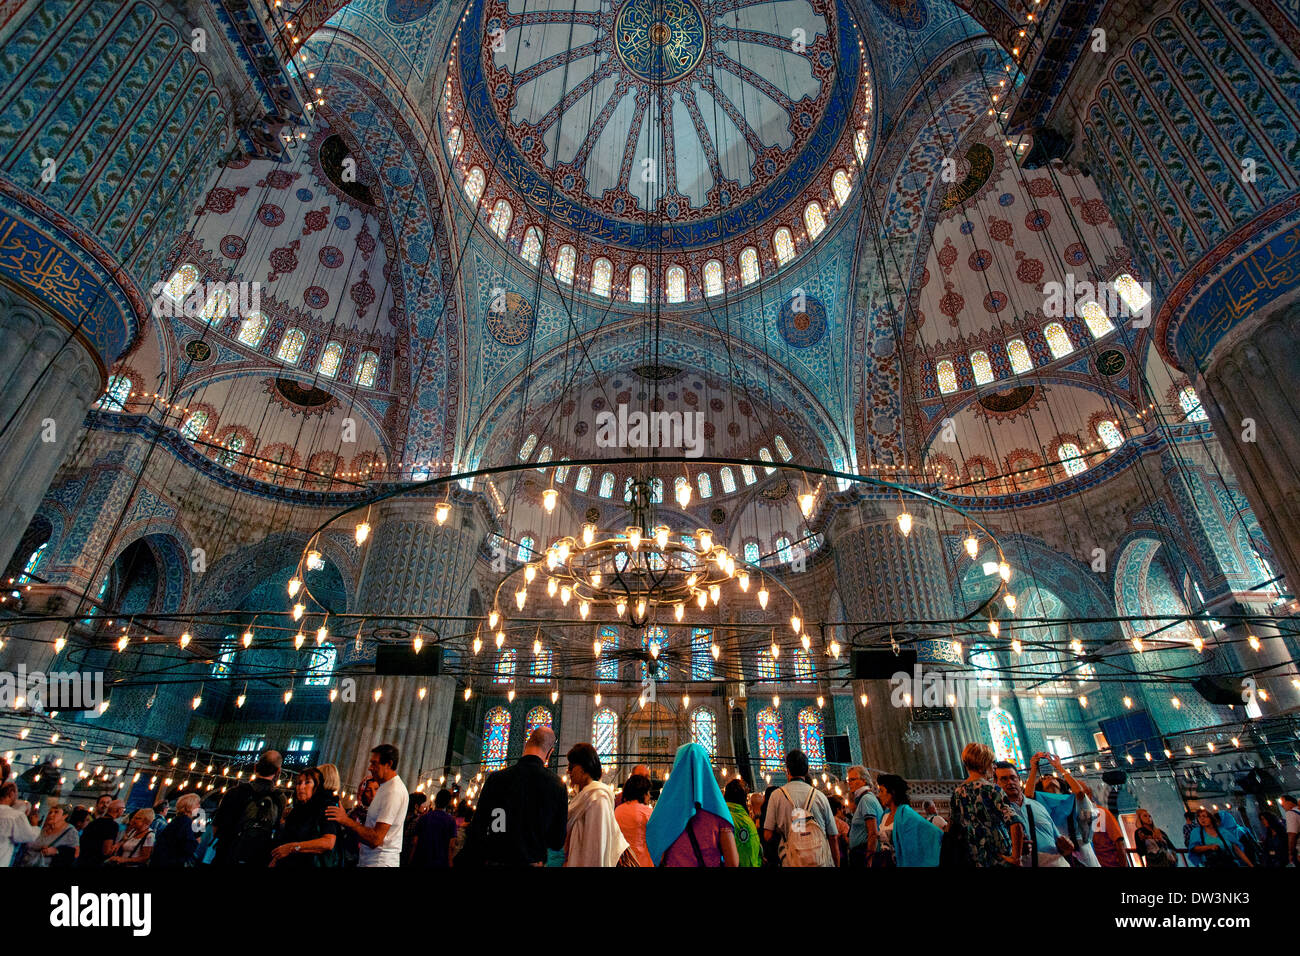 Interior Of The Domes In The Blue Mosque In Istanbul Turkey